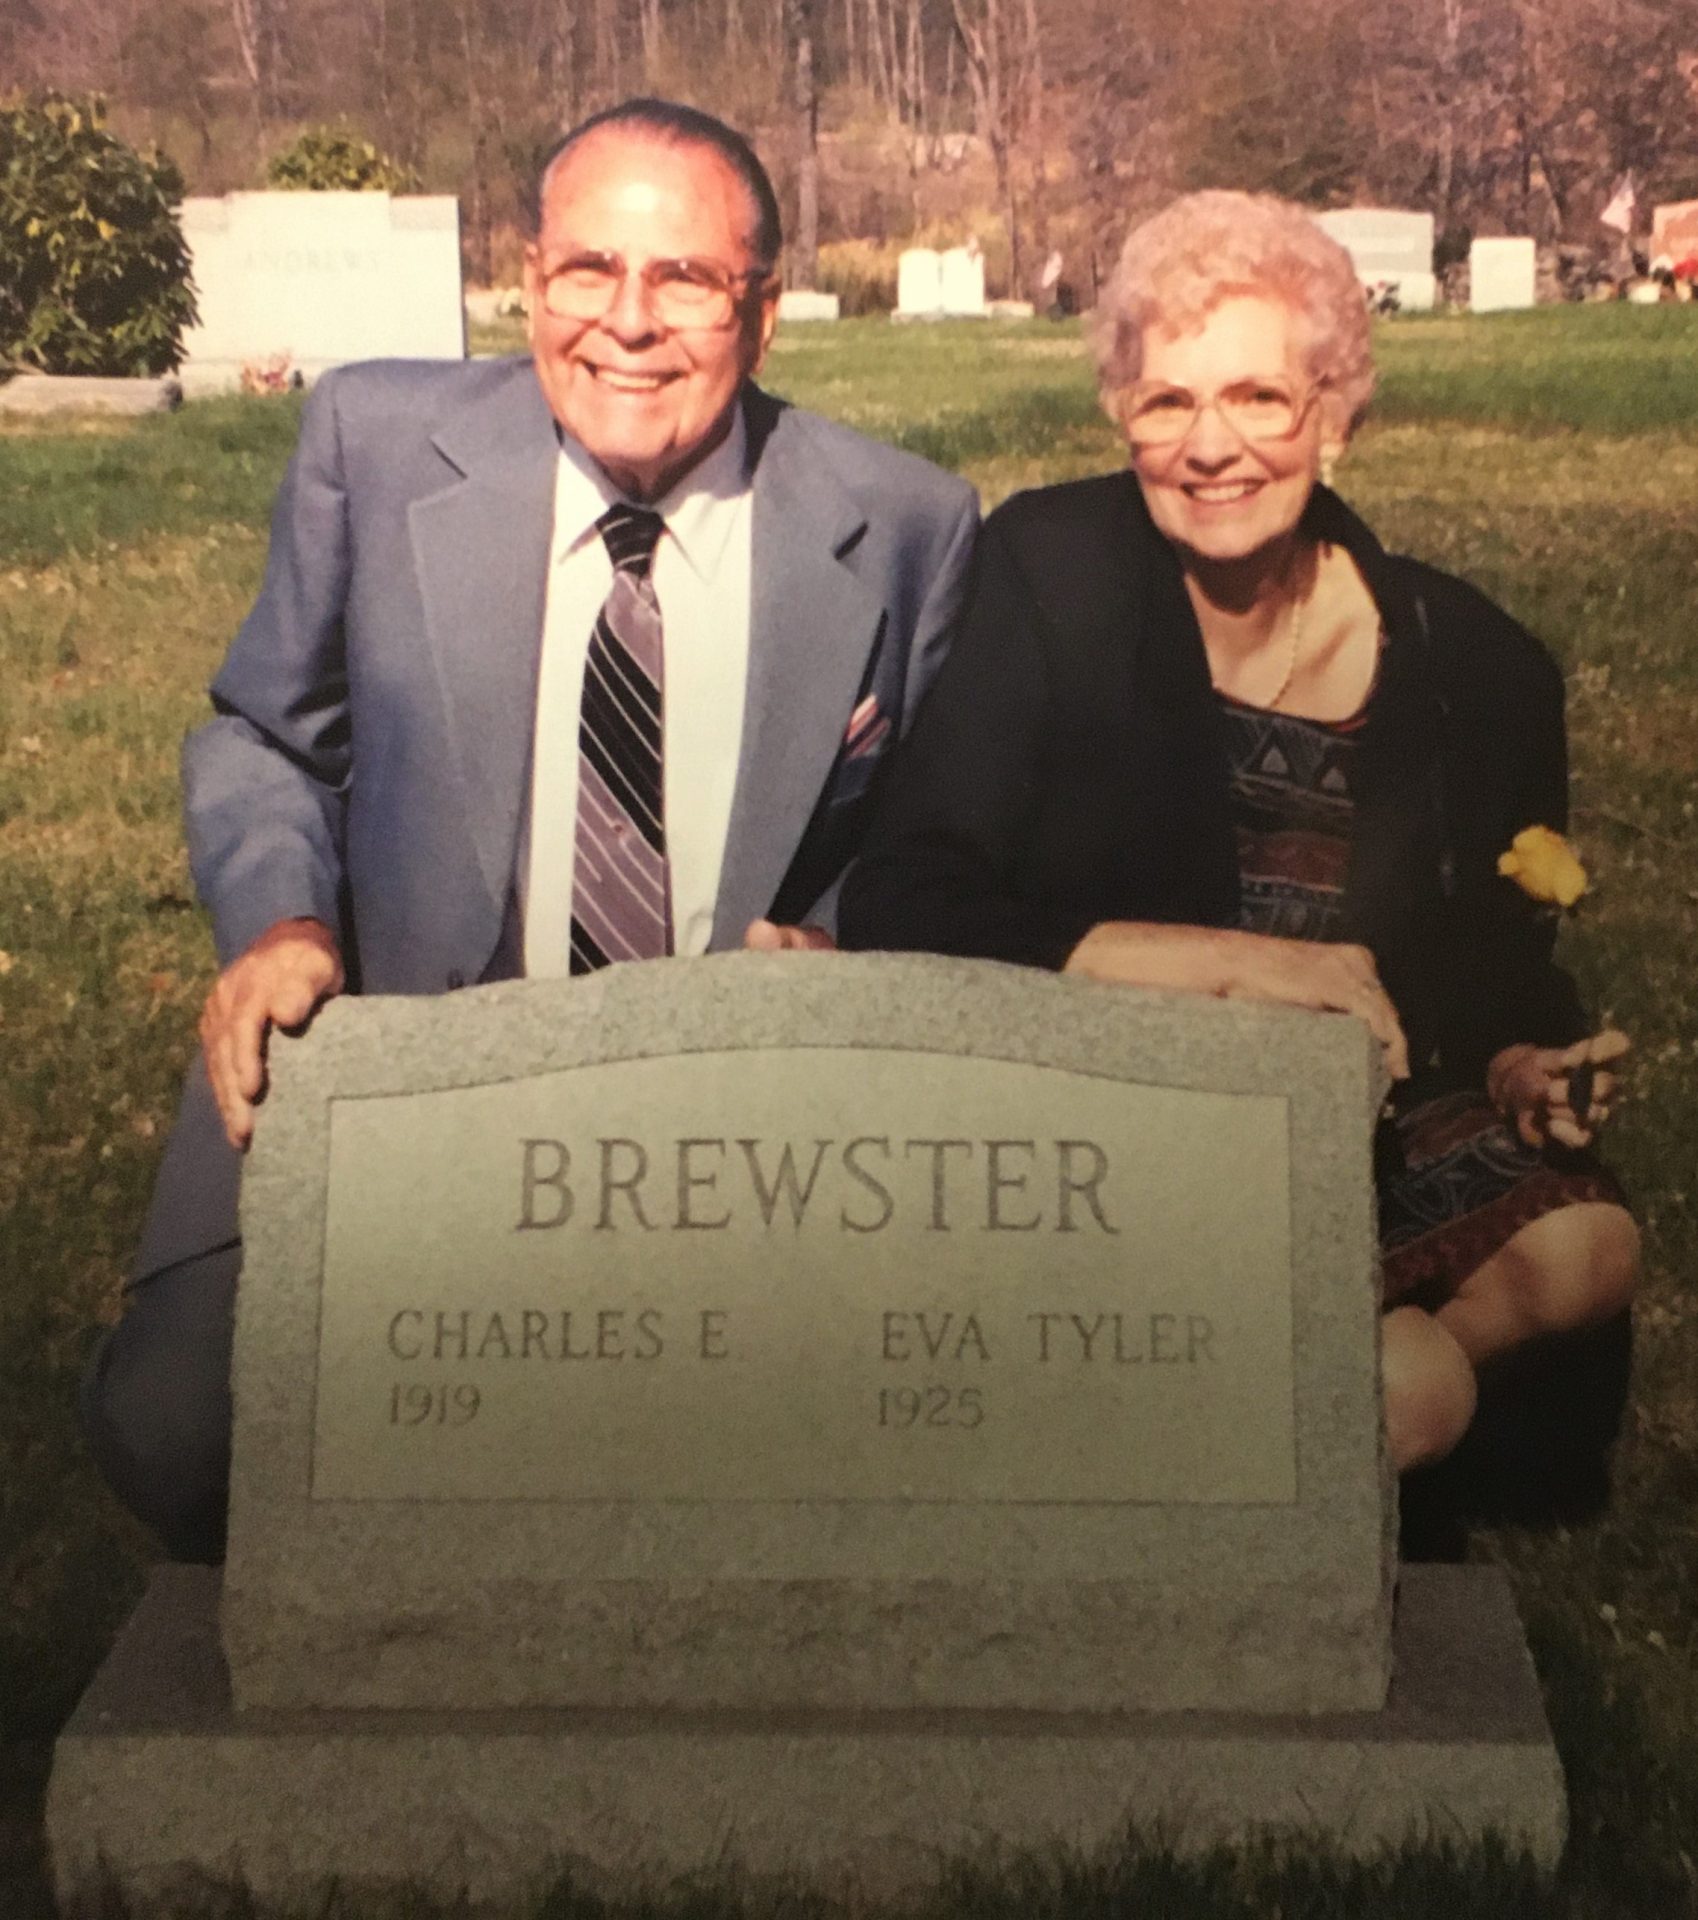 Mom & Dad had a great sense of humor about life. This picture proves it. It was taken many years at there final resting in Lebanon, CT.